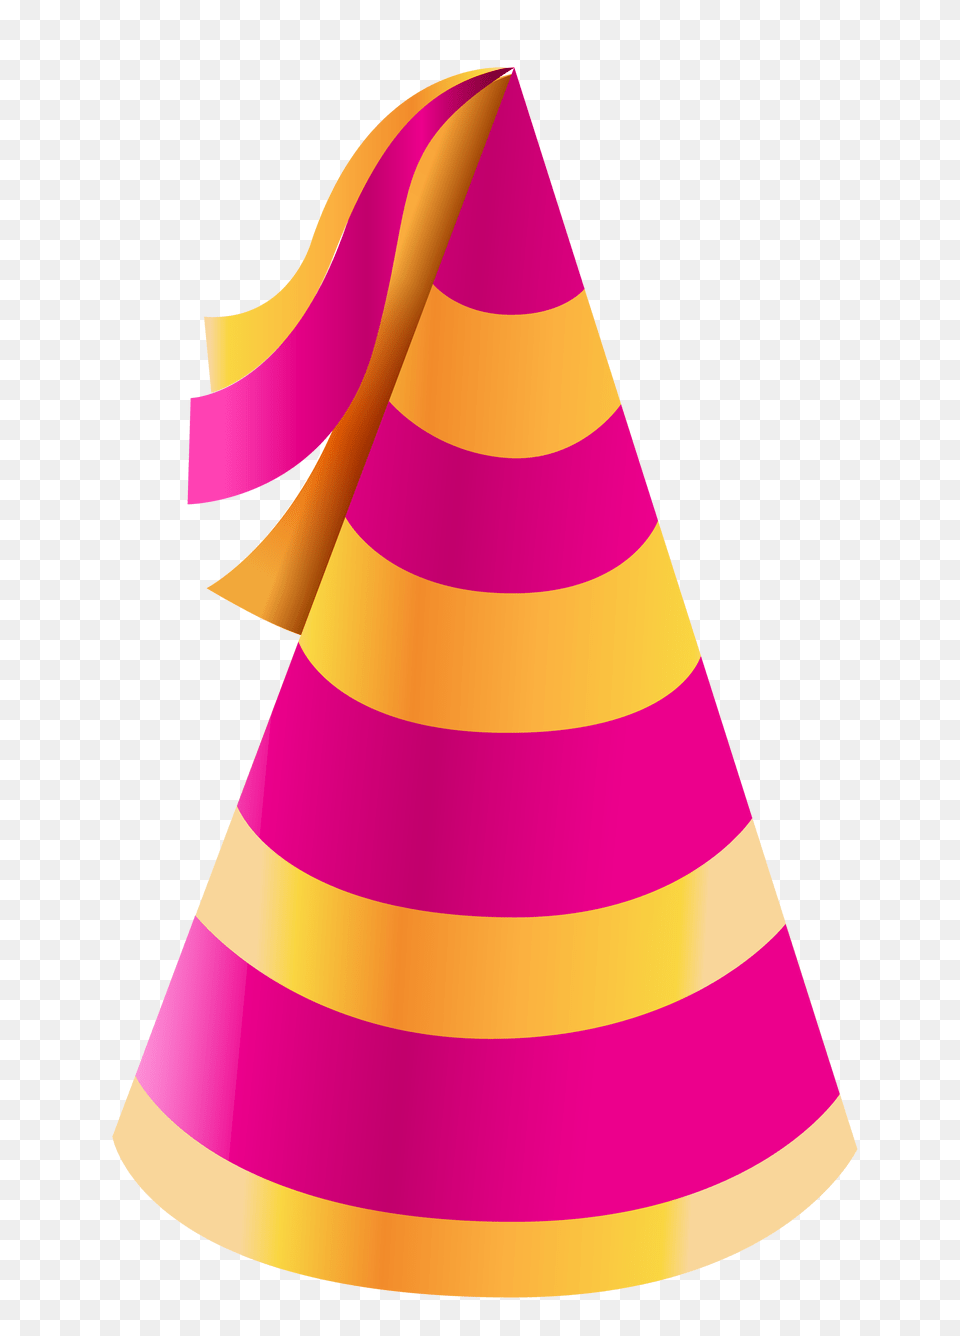 Pngpix Com Party Hat Image, Clothing, Dynamite, Weapon, Party Hat Free Png